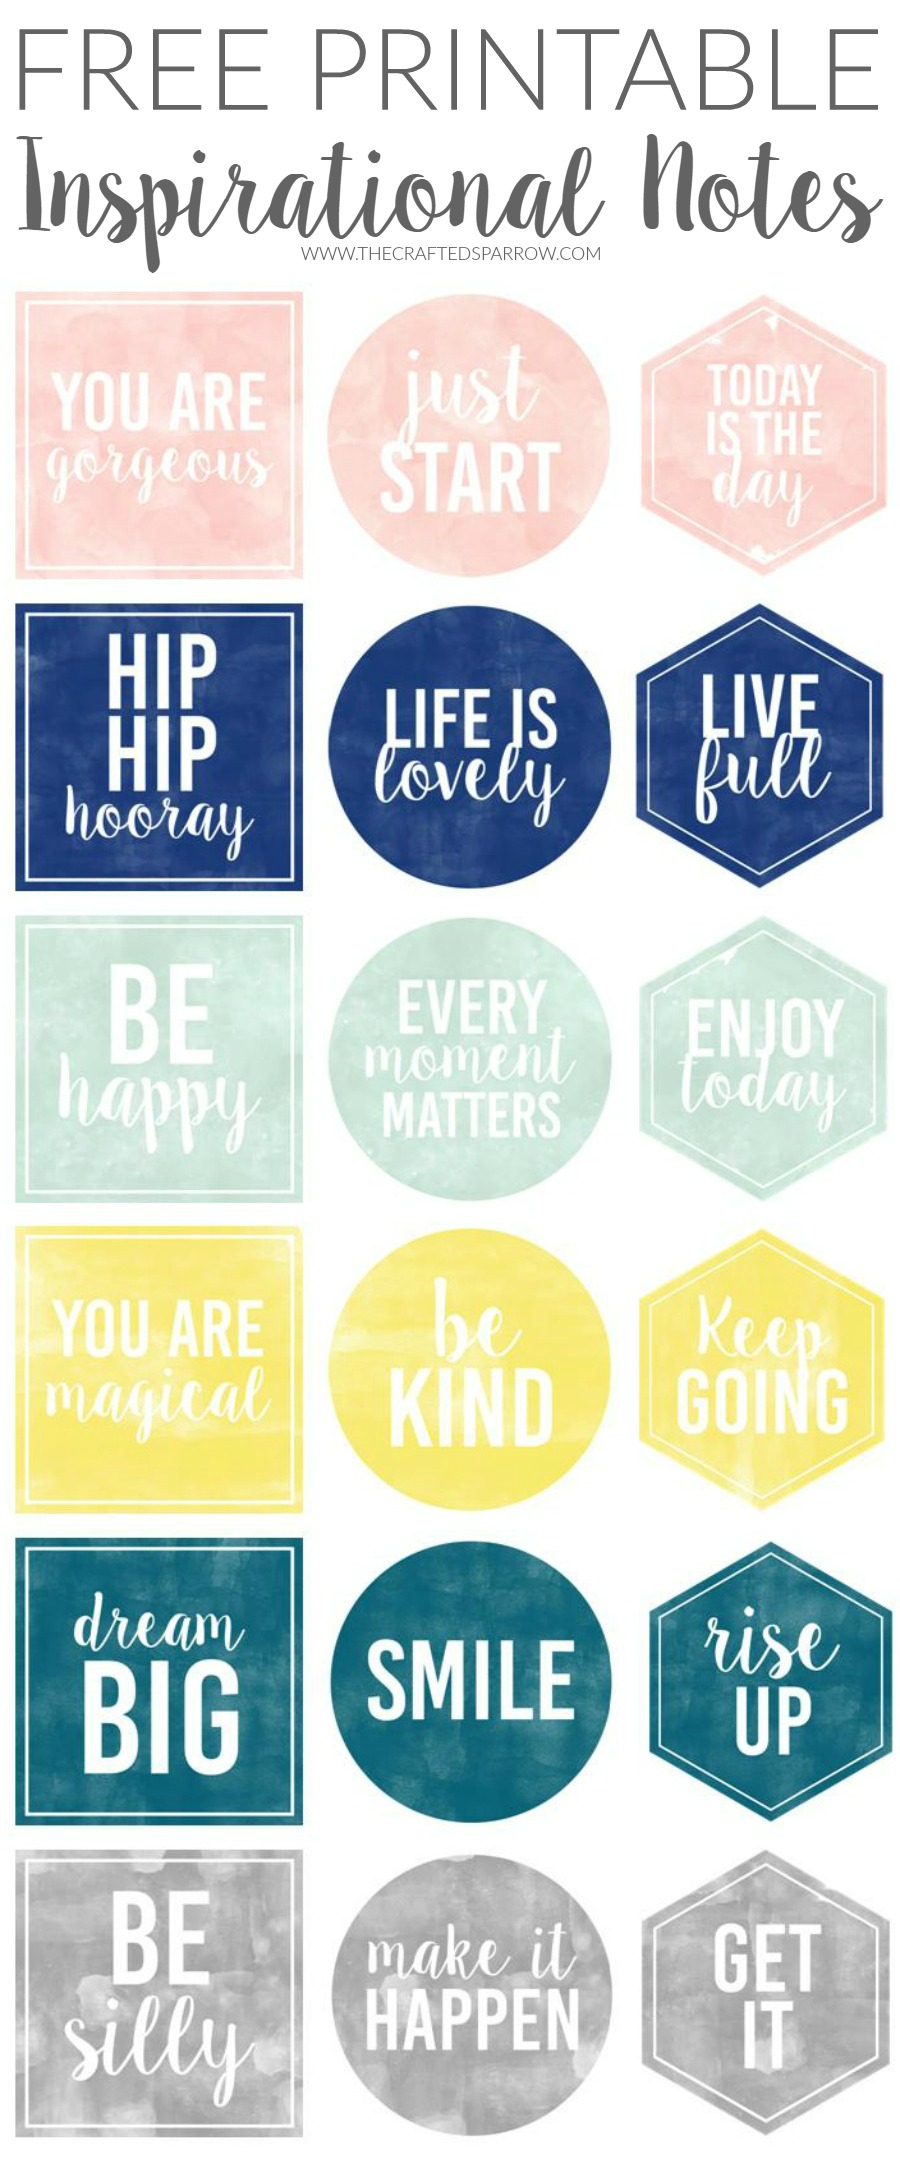 Free Printable Inspirational Notes